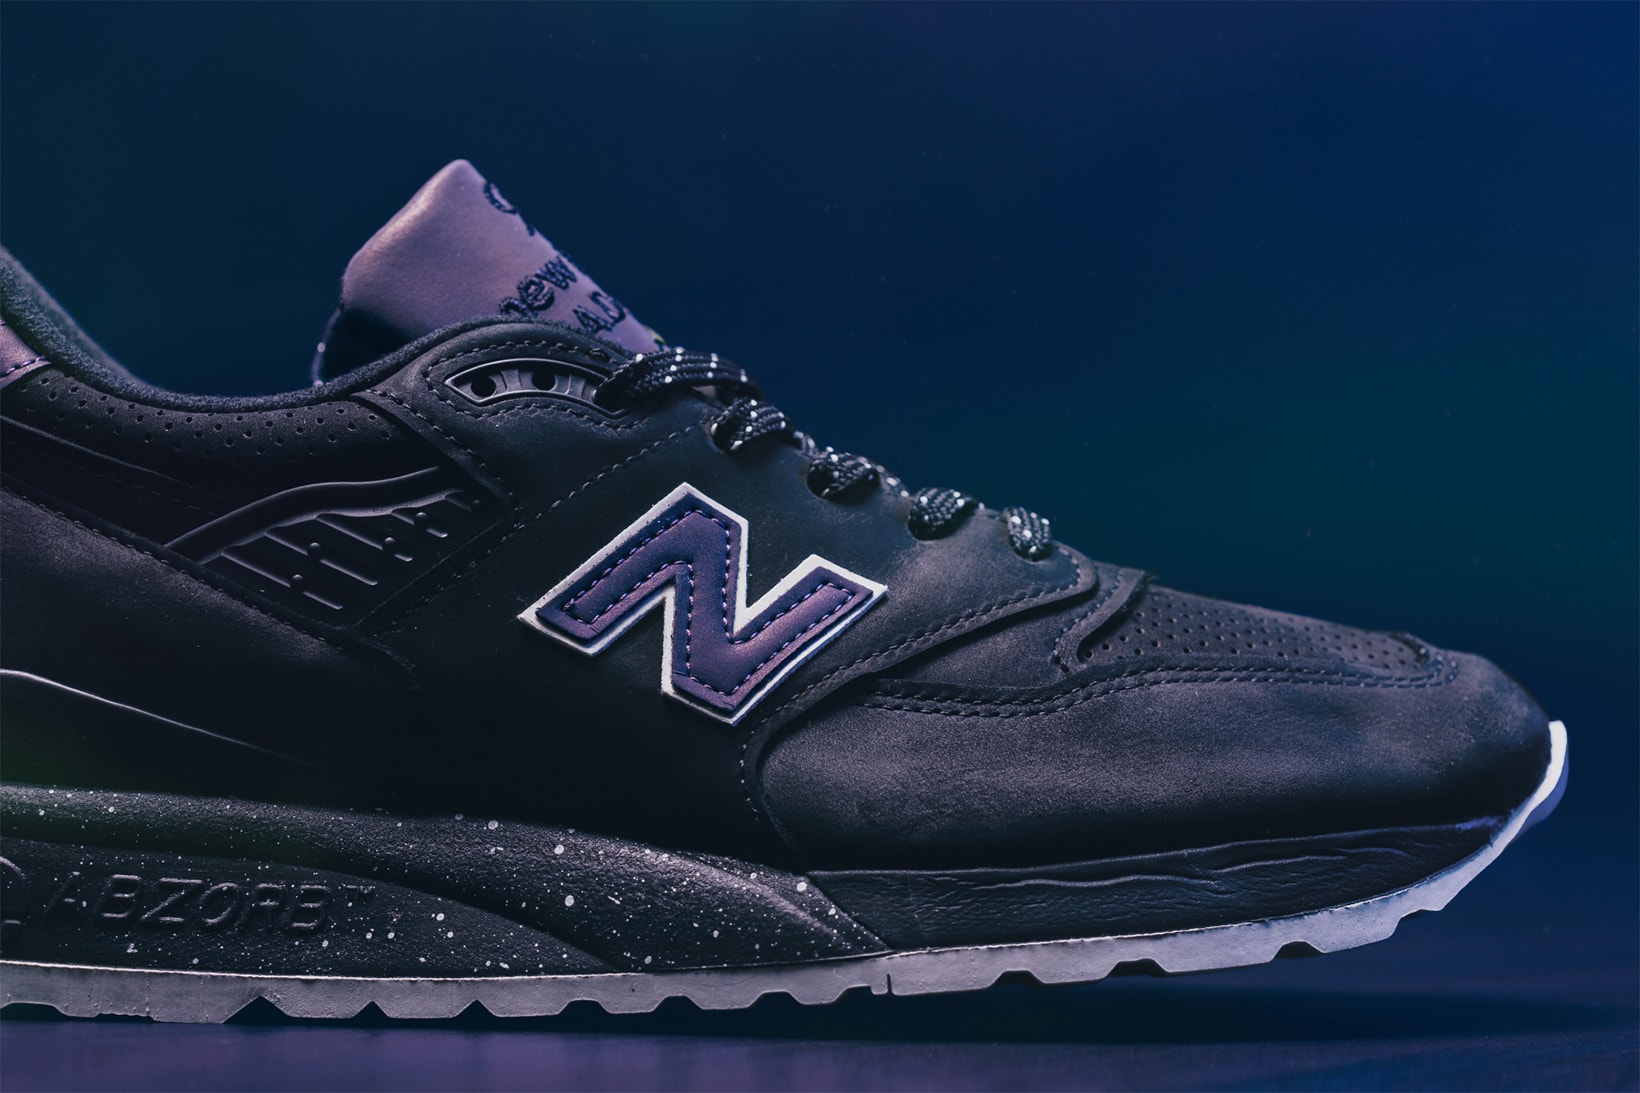 New Balance 998 Made in the USA Northern Lights Black 2017 October 31 Halloween Release Sneakers Shoes Footwear Feature 3M 2017